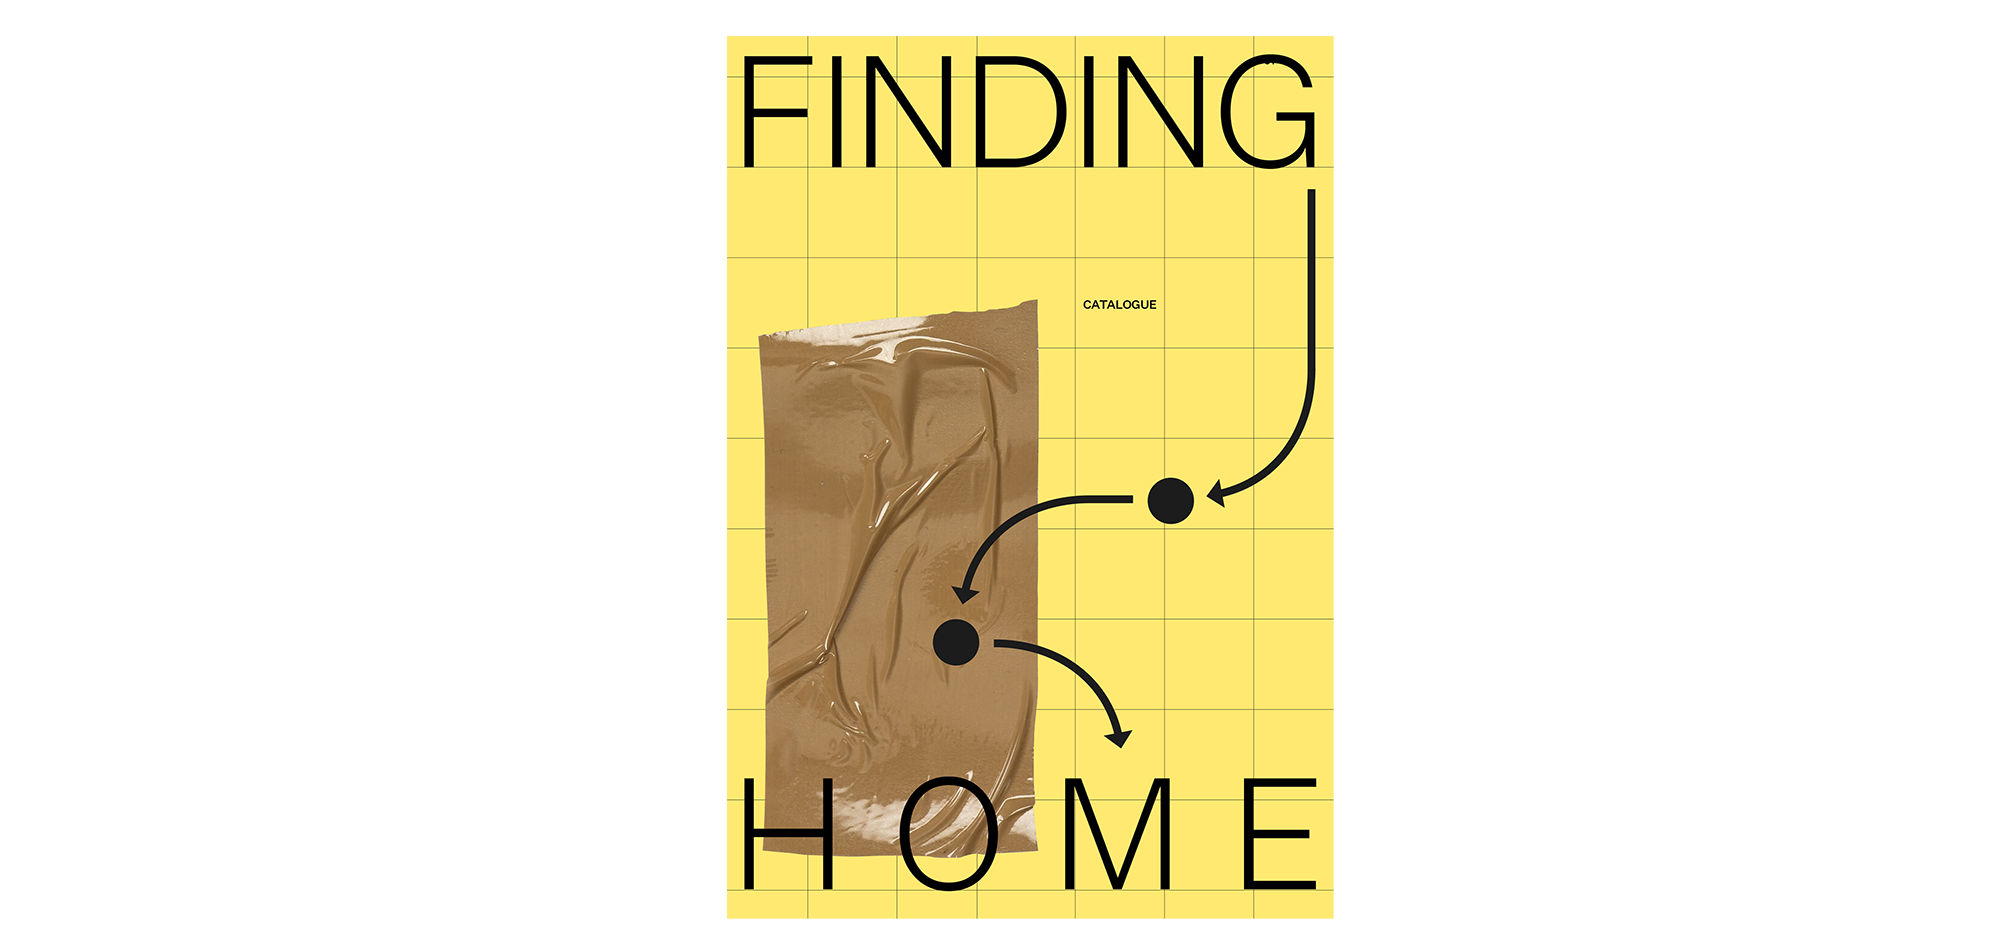 FINDING HOME: catalogue